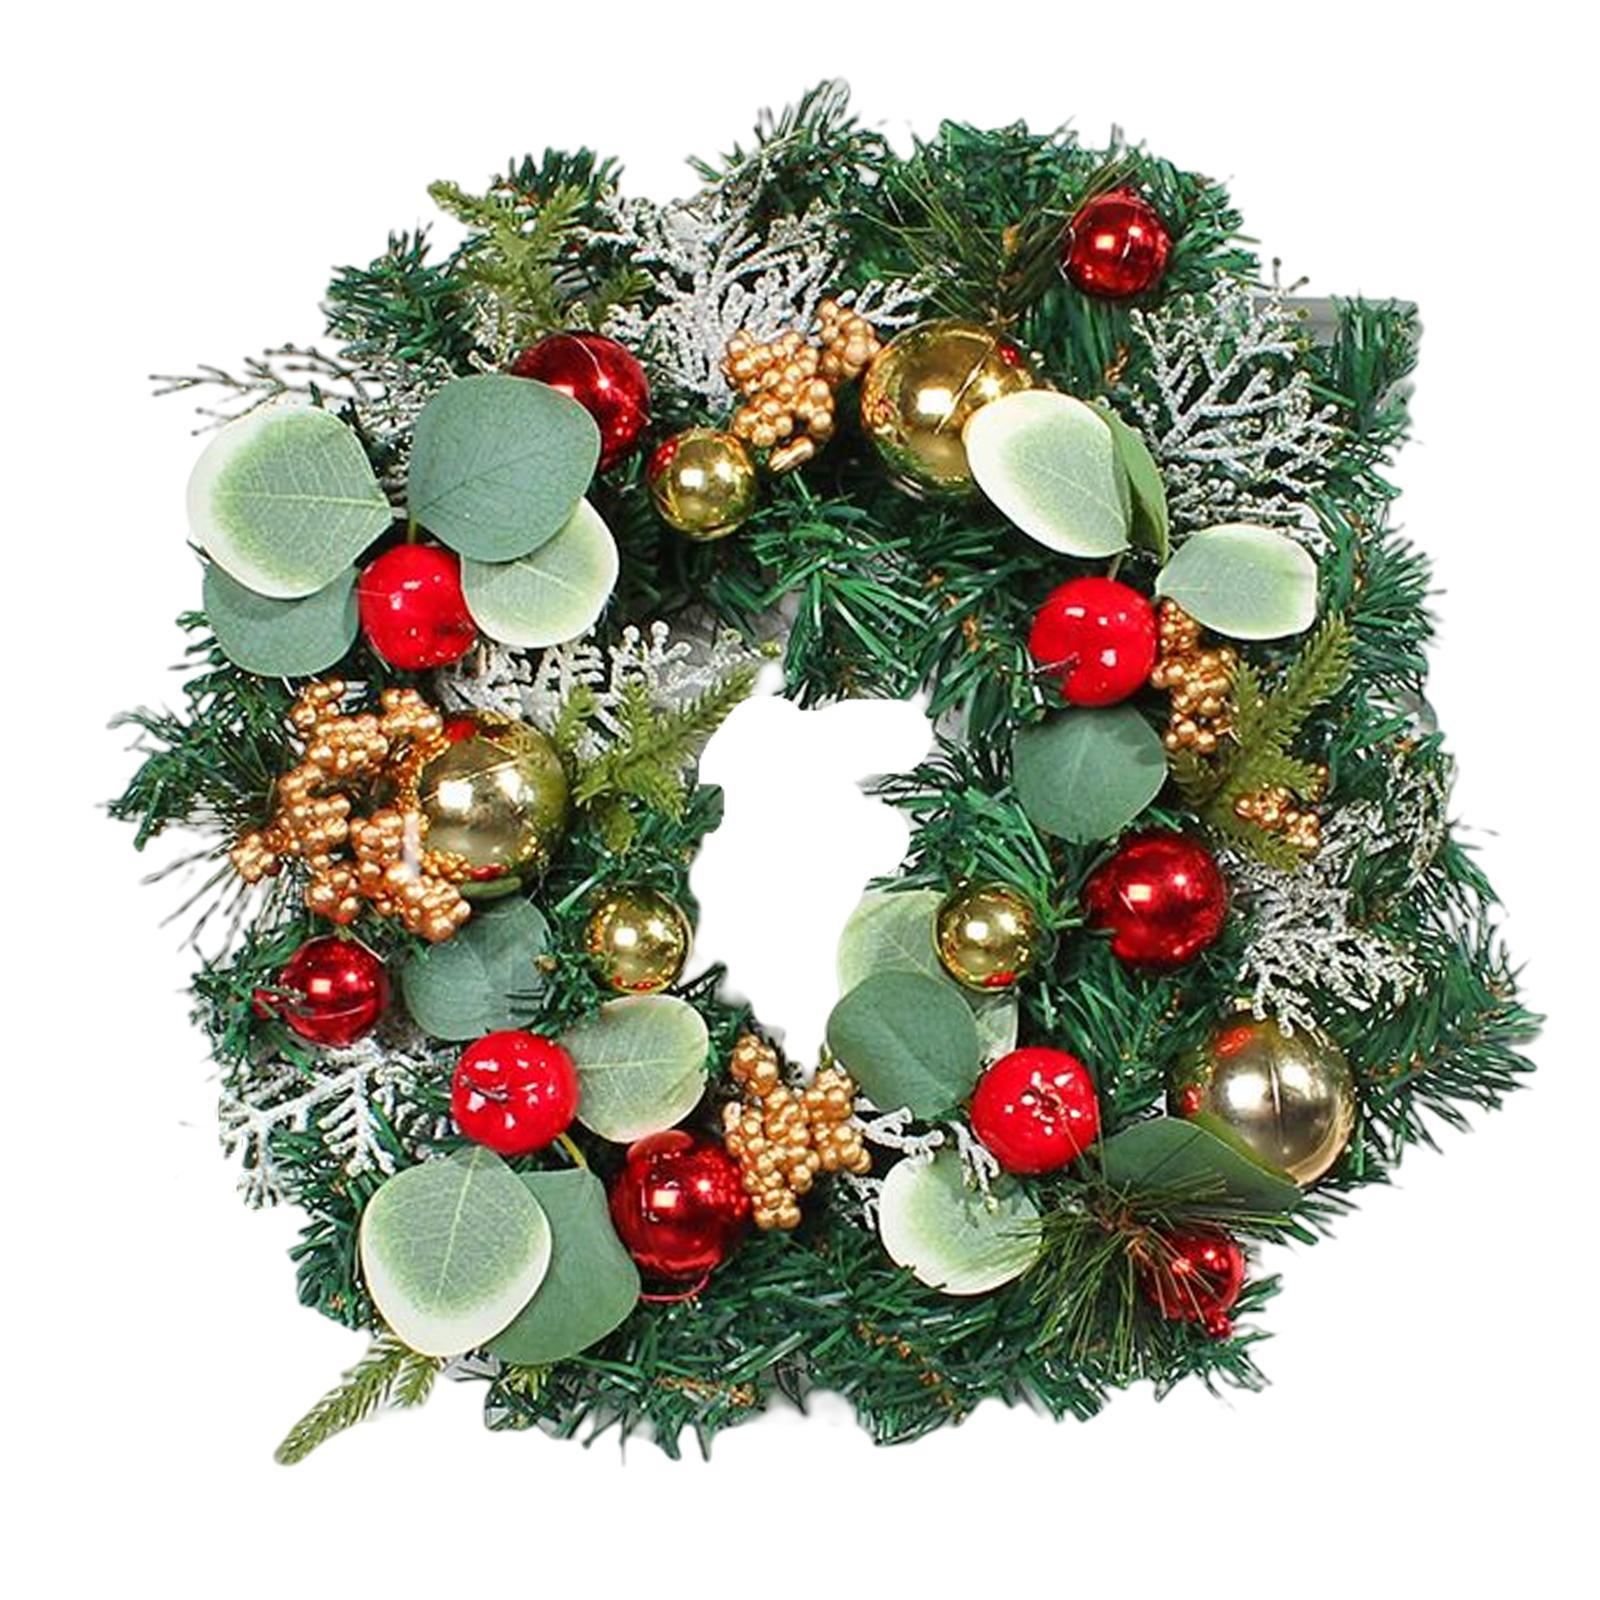 Bring the holiday cheer with christmas decoration garland for your home